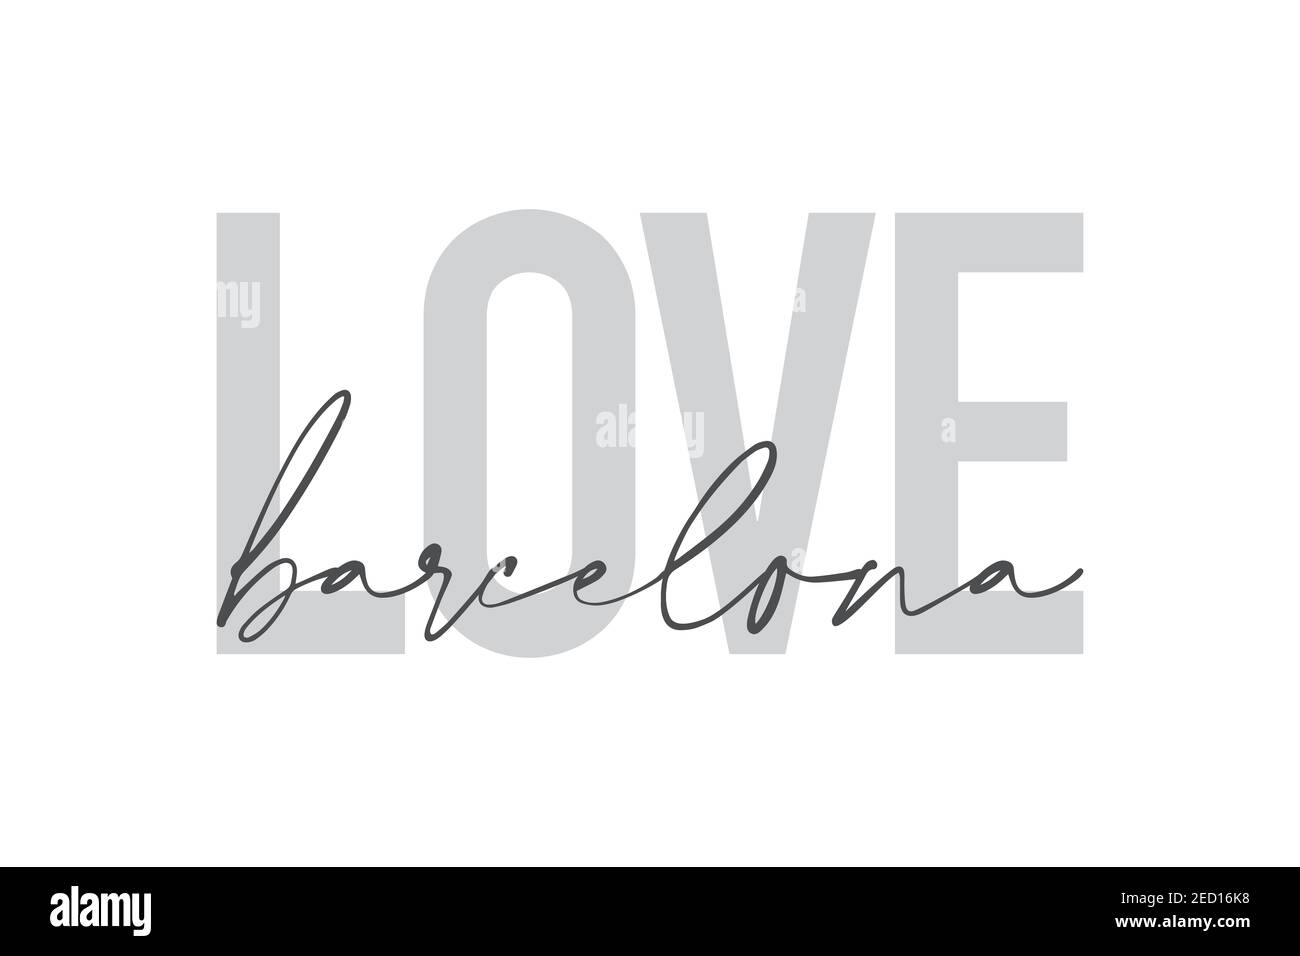 Modern, urban, simple graphic design of a saying 'Love Barcelona' in grey colors. Trendy, cool, handwritten typography Stock Photo